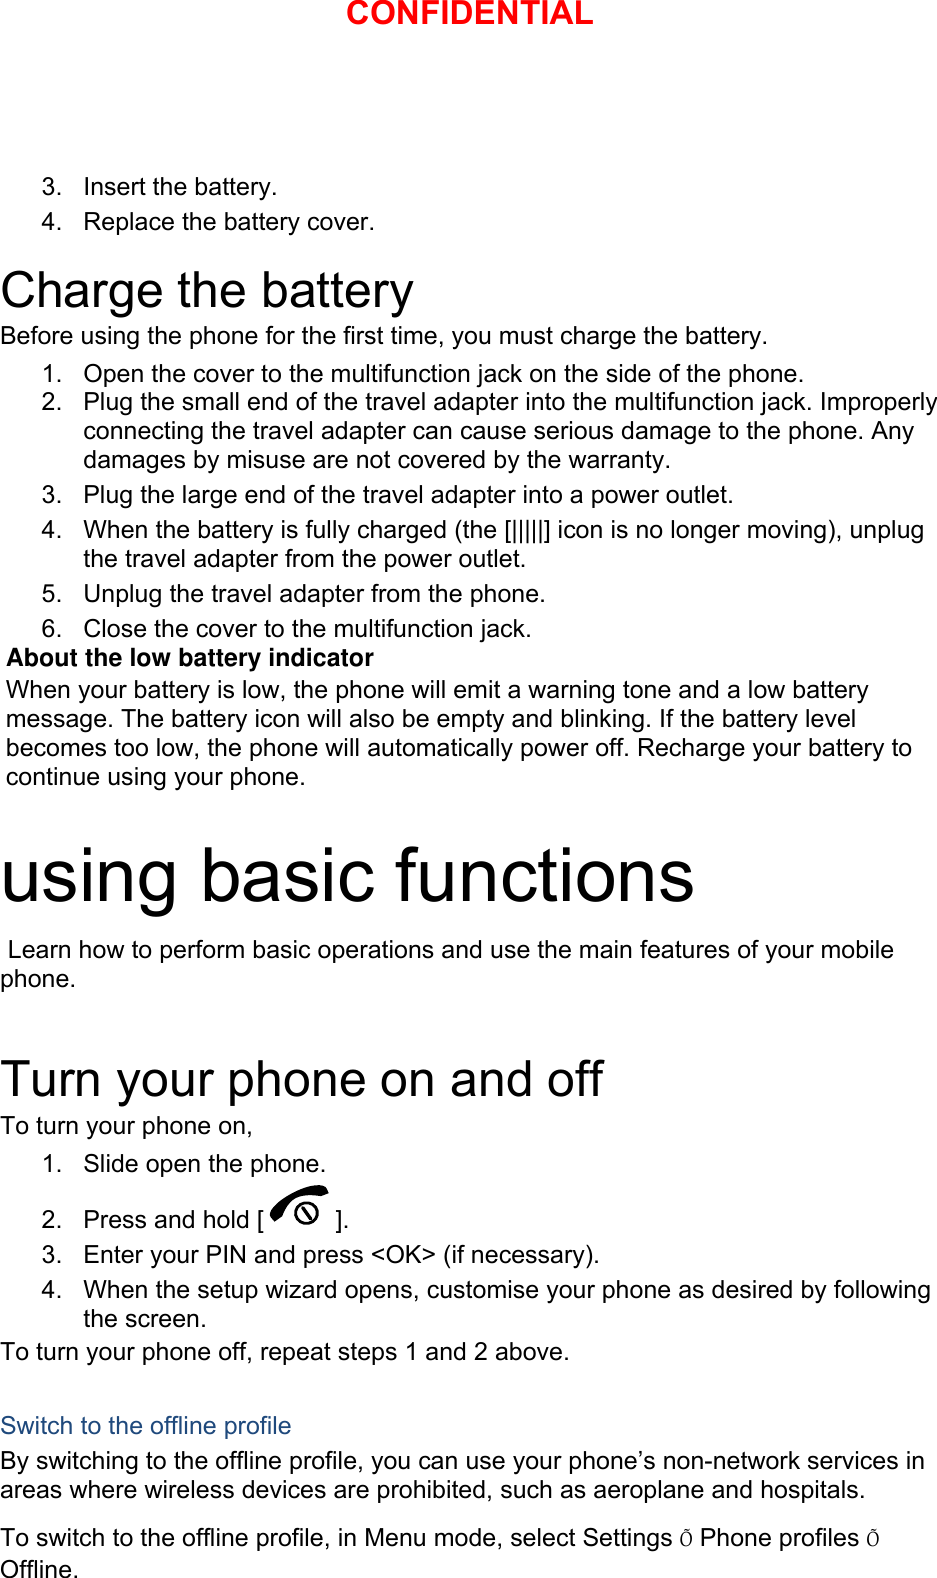 3. Insert the battery. 4.  Replace the battery cover.  Charge the battery Before using the phone for the first time, you must charge the battery. 1.  Open the cover to the multifunction jack on the side of the phone. 2.  Plug the small end of the travel adapter into the multifunction jack. Improperly connecting the travel adapter can cause serious damage to the phone. Any damages by misuse are not covered by the warranty. 3.  Plug the large end of the travel adapter into a power outlet. 4.  When the battery is fully charged (the [|||||] icon is no longer moving), unplug the travel adapter from the power outlet. 5.  Unplug the travel adapter from the phone. 6.  Close the cover to the multifunction jack. About the low battery indicator When your battery is low, the phone will emit a warning tone and a low battery message. The battery icon will also be empty and blinking. If the battery level becomes too low, the phone will automatically power off. Recharge your battery to continue using your phone.  using basic functions  Learn how to perform basic operations and use the main features of your mobile phone.   Turn your phone on and off To turn your phone on, 1.  Slide open the phone. 2.  Press and hold [ ]. 3.  Enter your PIN and press &lt;OK&gt; (if necessary). 4.  When the setup wizard opens, customise your phone as desired by following the screen. To turn your phone off, repeat steps 1 and 2 above.  Switch to the offline profile By switching to the offline profile, you can use your phone’s non-network services in areas where wireless devices are prohibited, such as aeroplane and hospitals. To switch to the offline profile, in Menu mode, select Settings Õ Phone profiles Õ Offline. CONFIDENTIAL